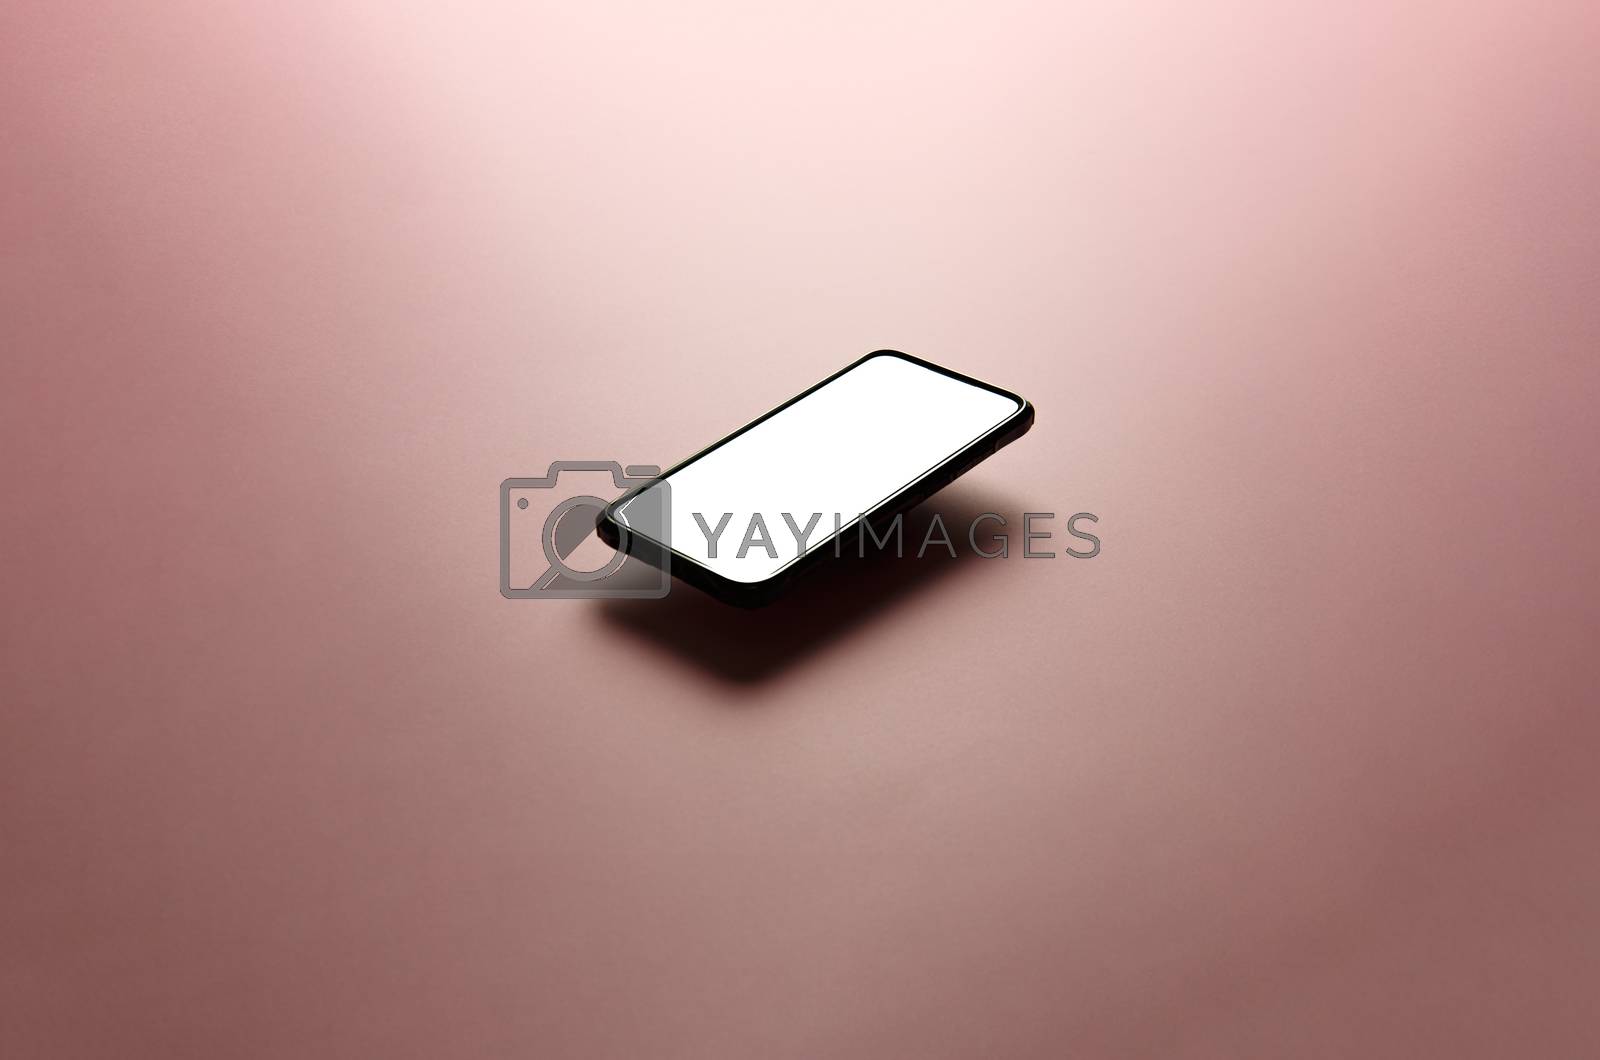 Royalty free image of Minimalistic mock up flat image design with a floating mobile phone with copy space and white scree to write over it over a flat pastel pink background by AveCalvar